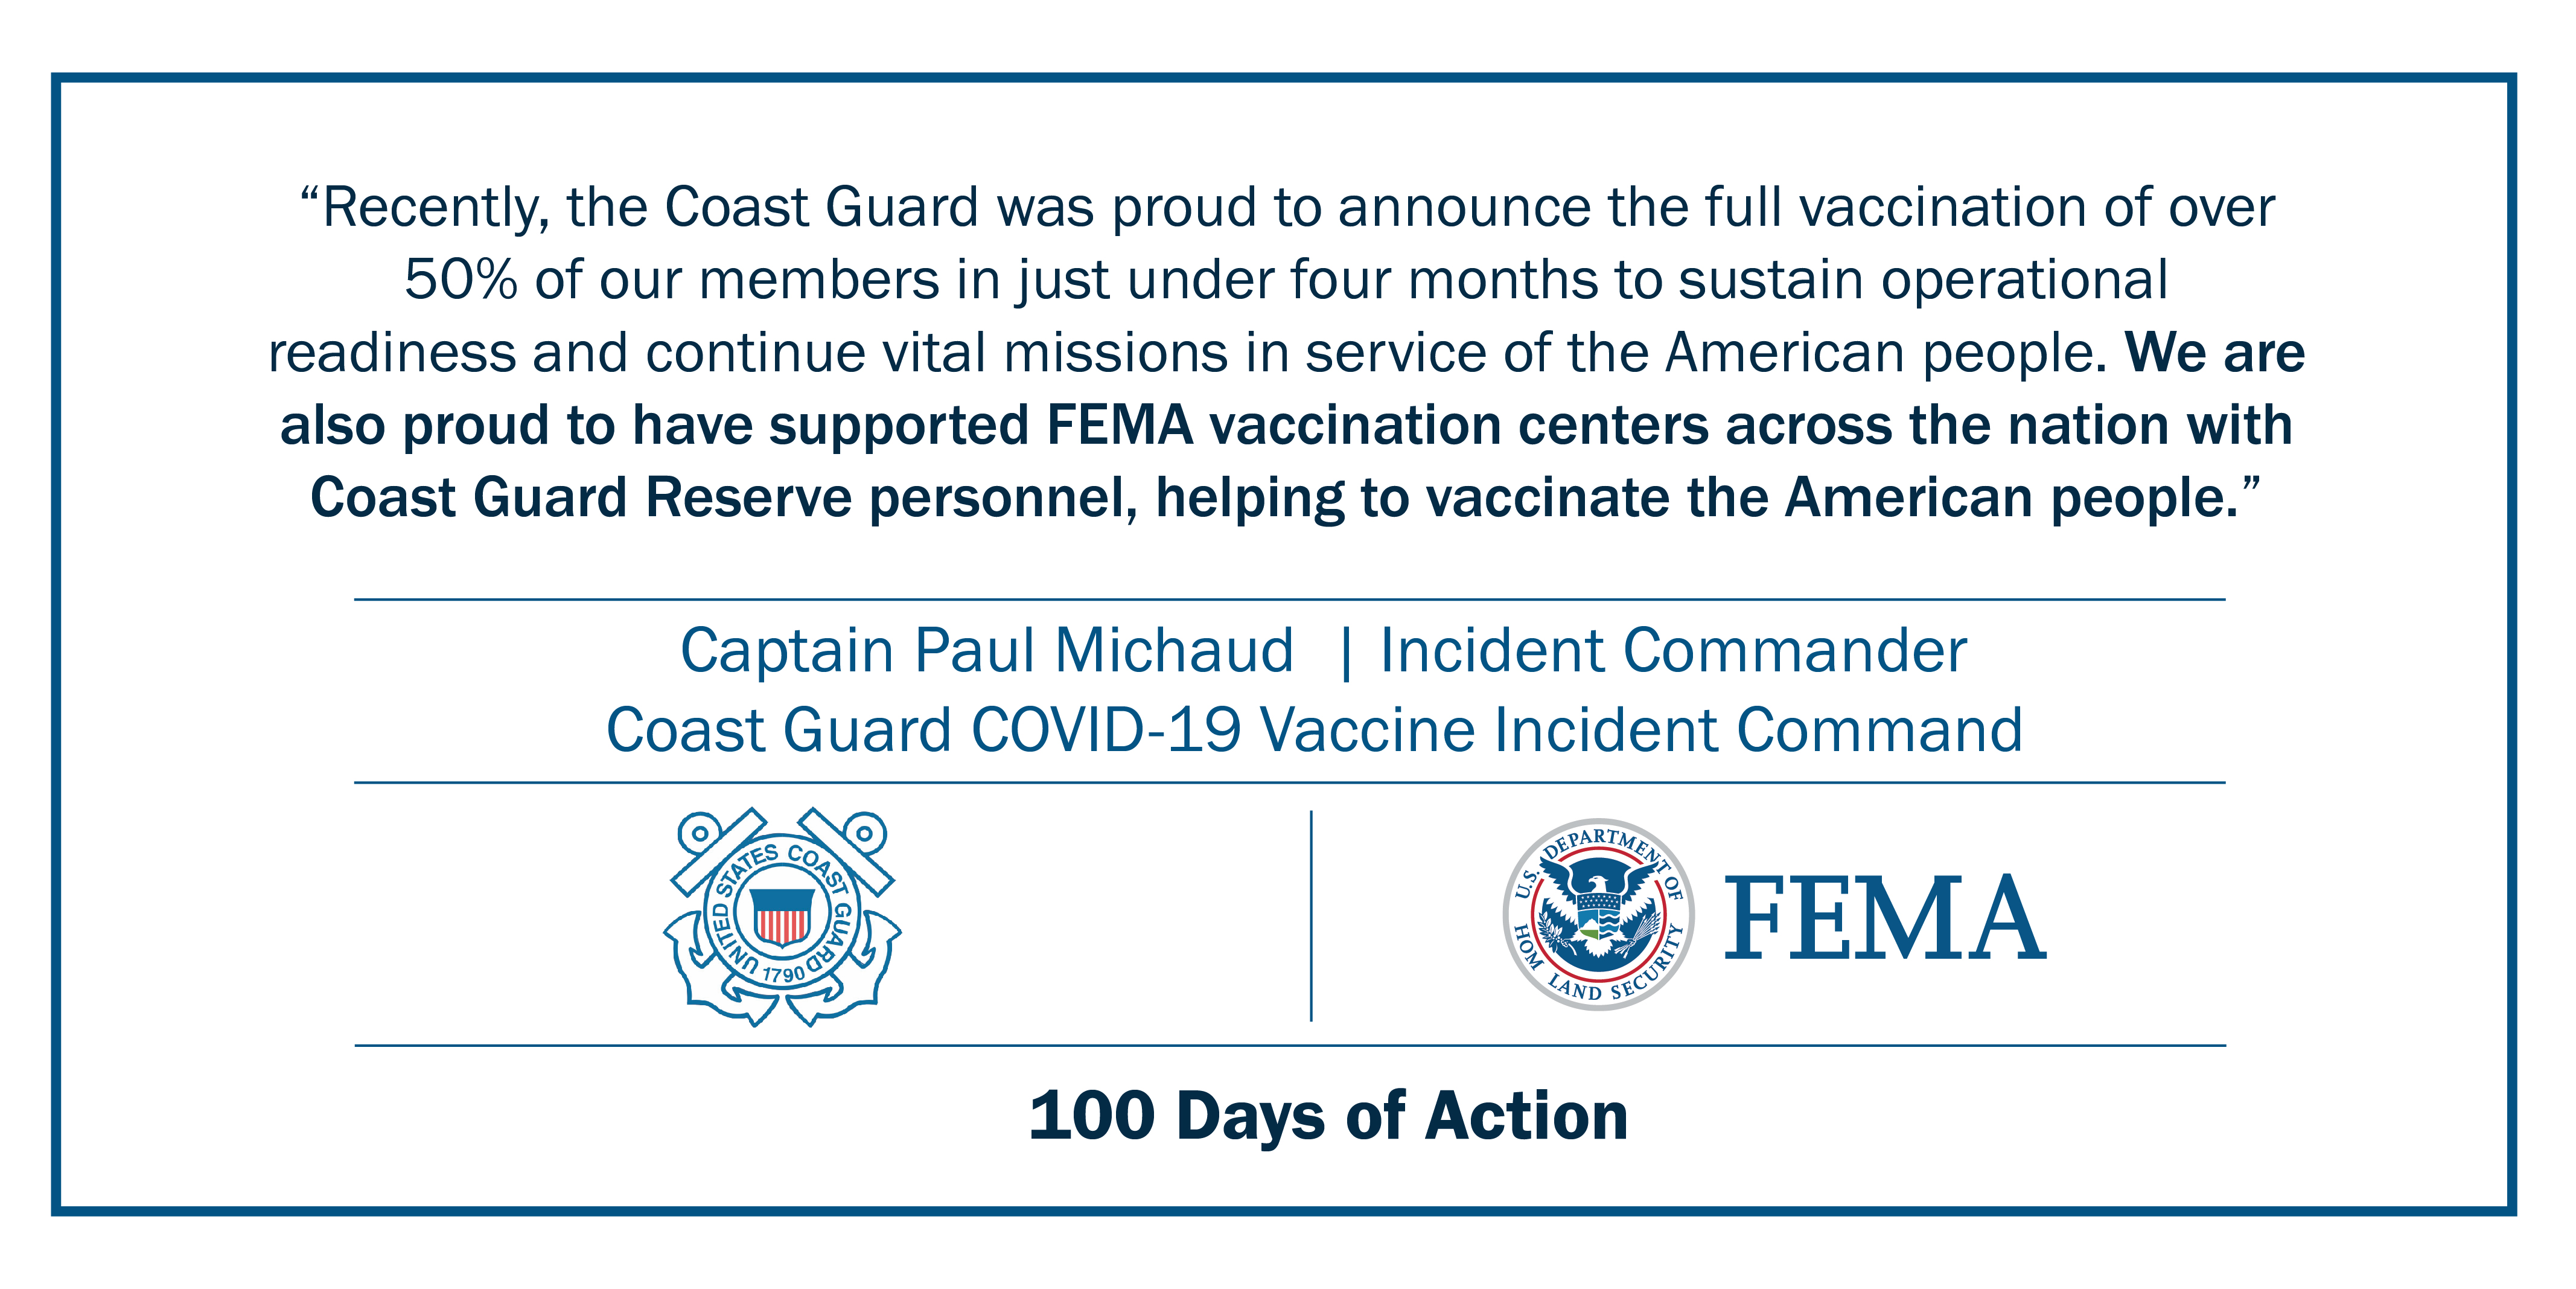 Recently, the Coast Guard was proud to announce the full vaccination of over 50% of our members in just under four months to sustain operational readiness and continue vital missions in service of the American people. We are also proud to have supported FEMA vaccination centers across the nation with Coast Guard Reserve personnel, helping to vaccinate the American people.”